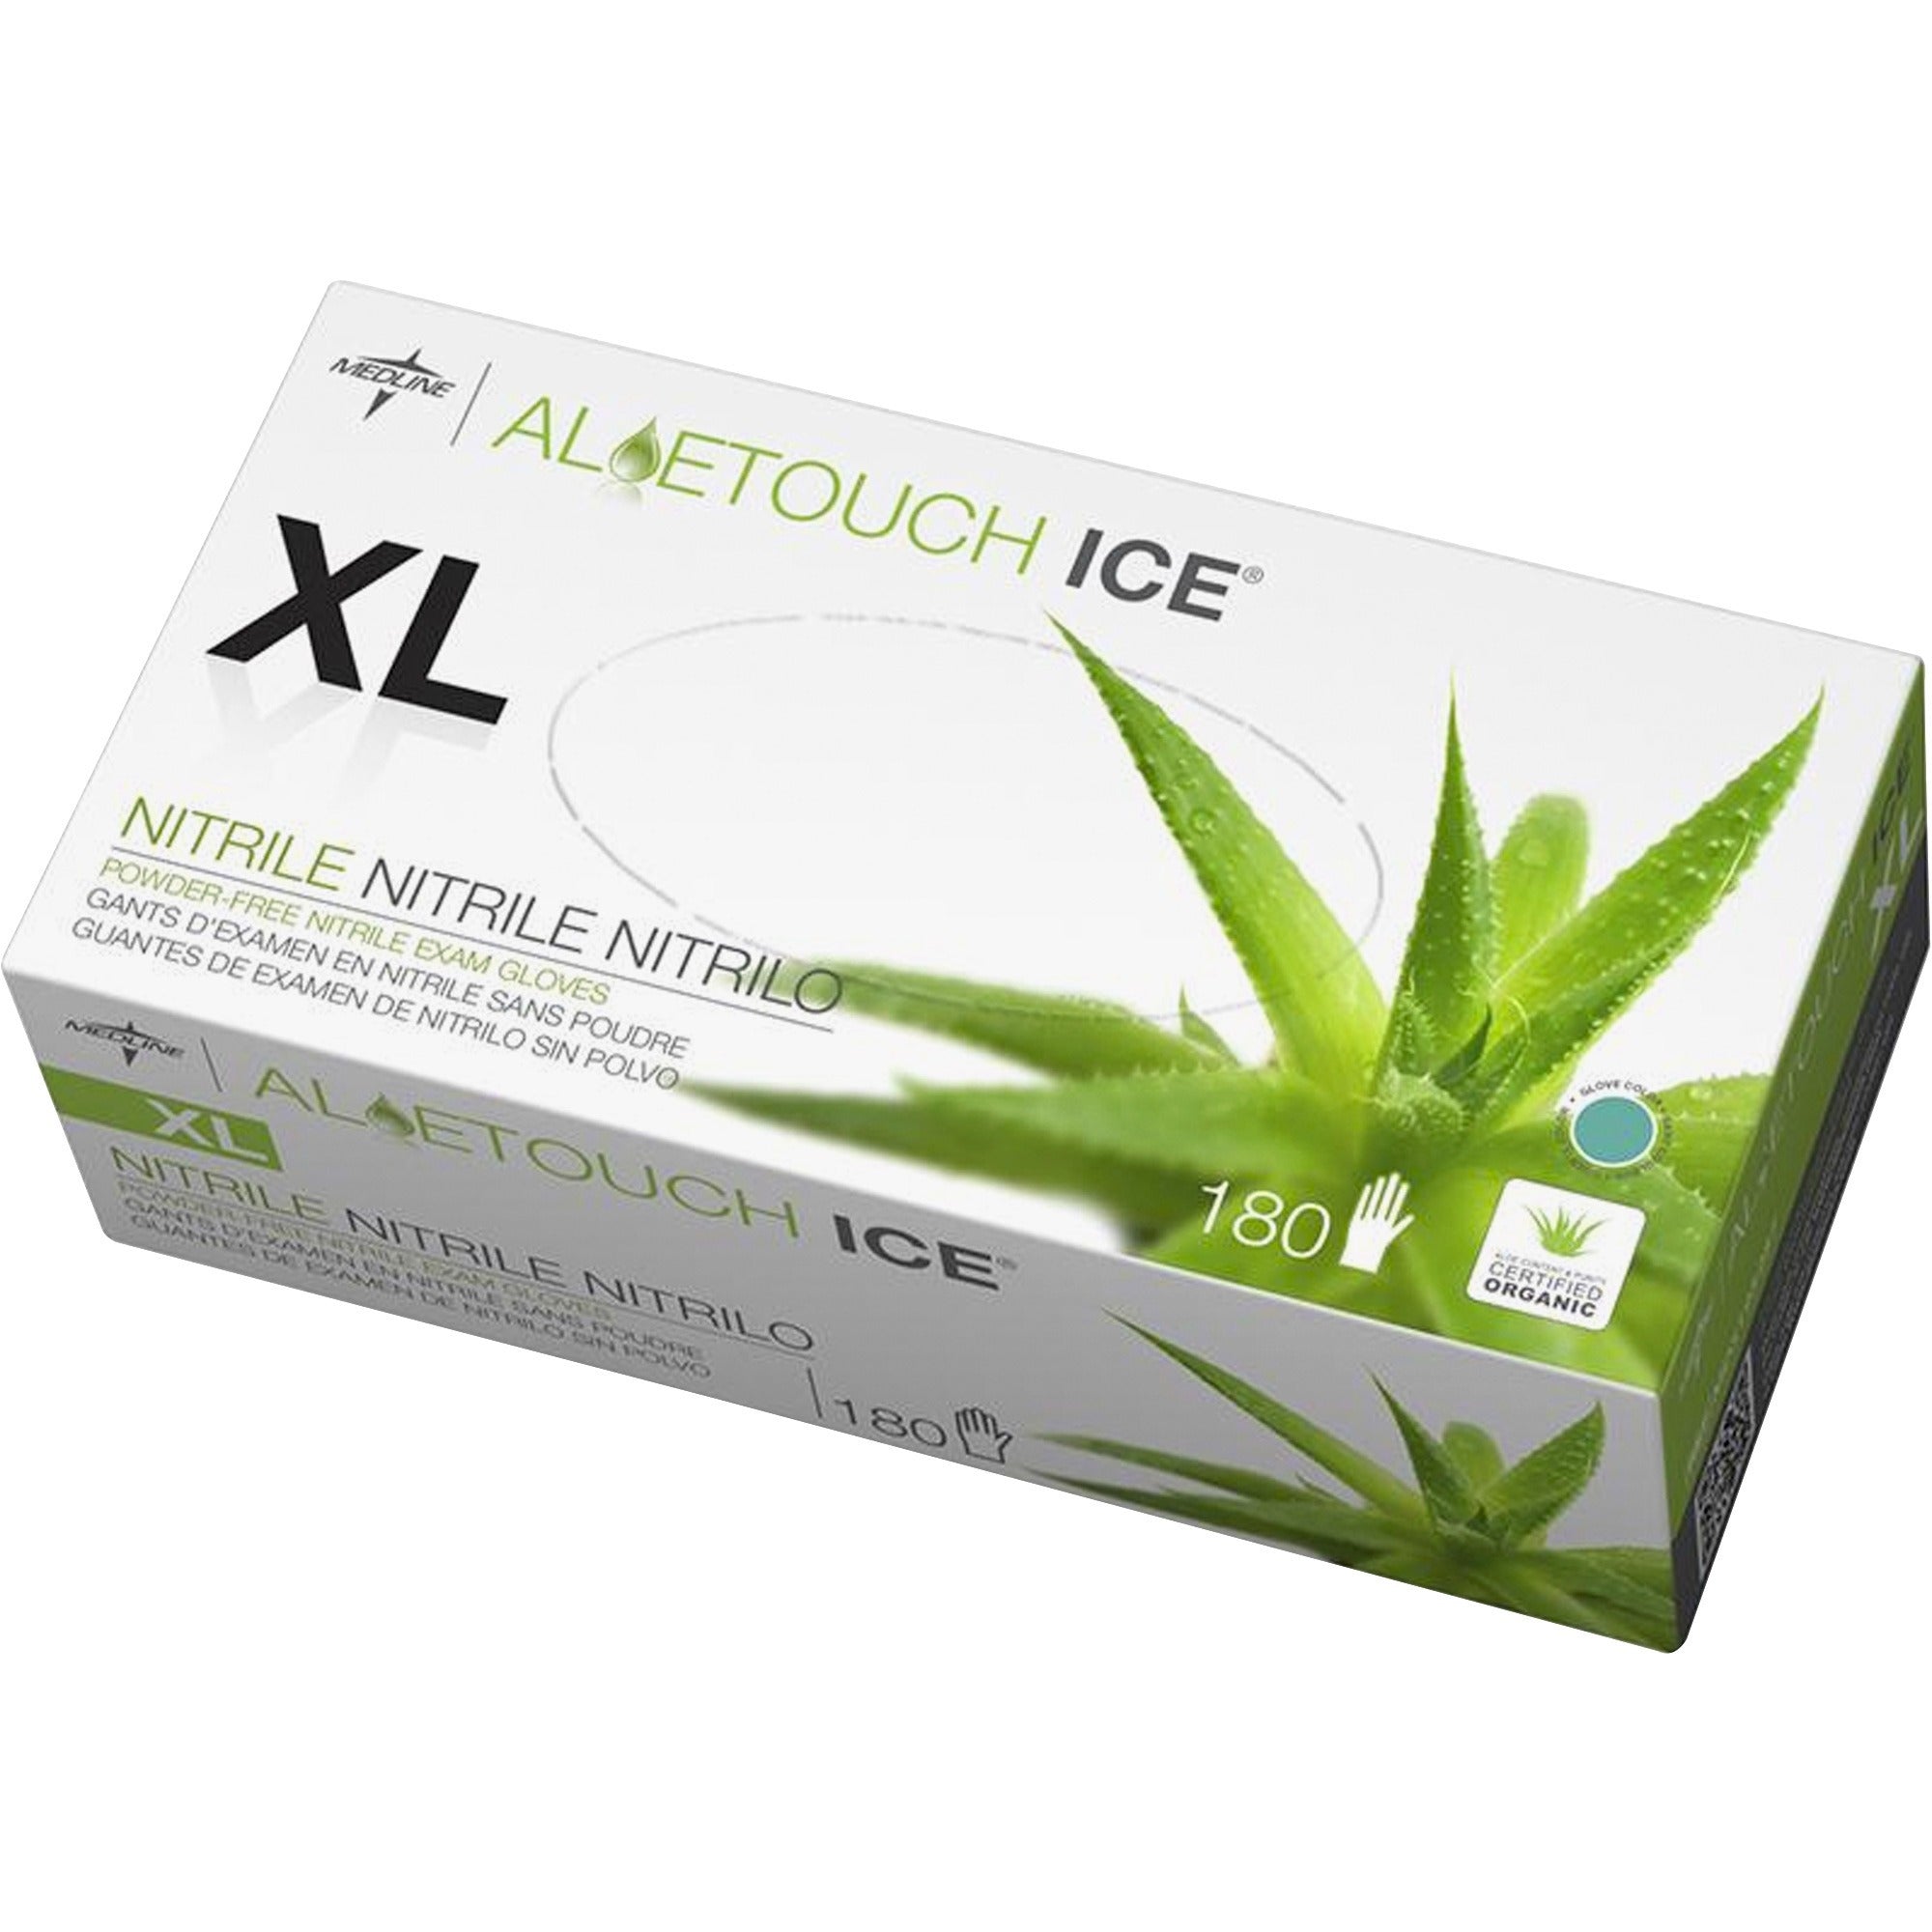 Medline Aloetouch Ice Nitrile Gloves - X-Large Size - Latex-free, Textured - For Healthcare Working - 180 / Box - 